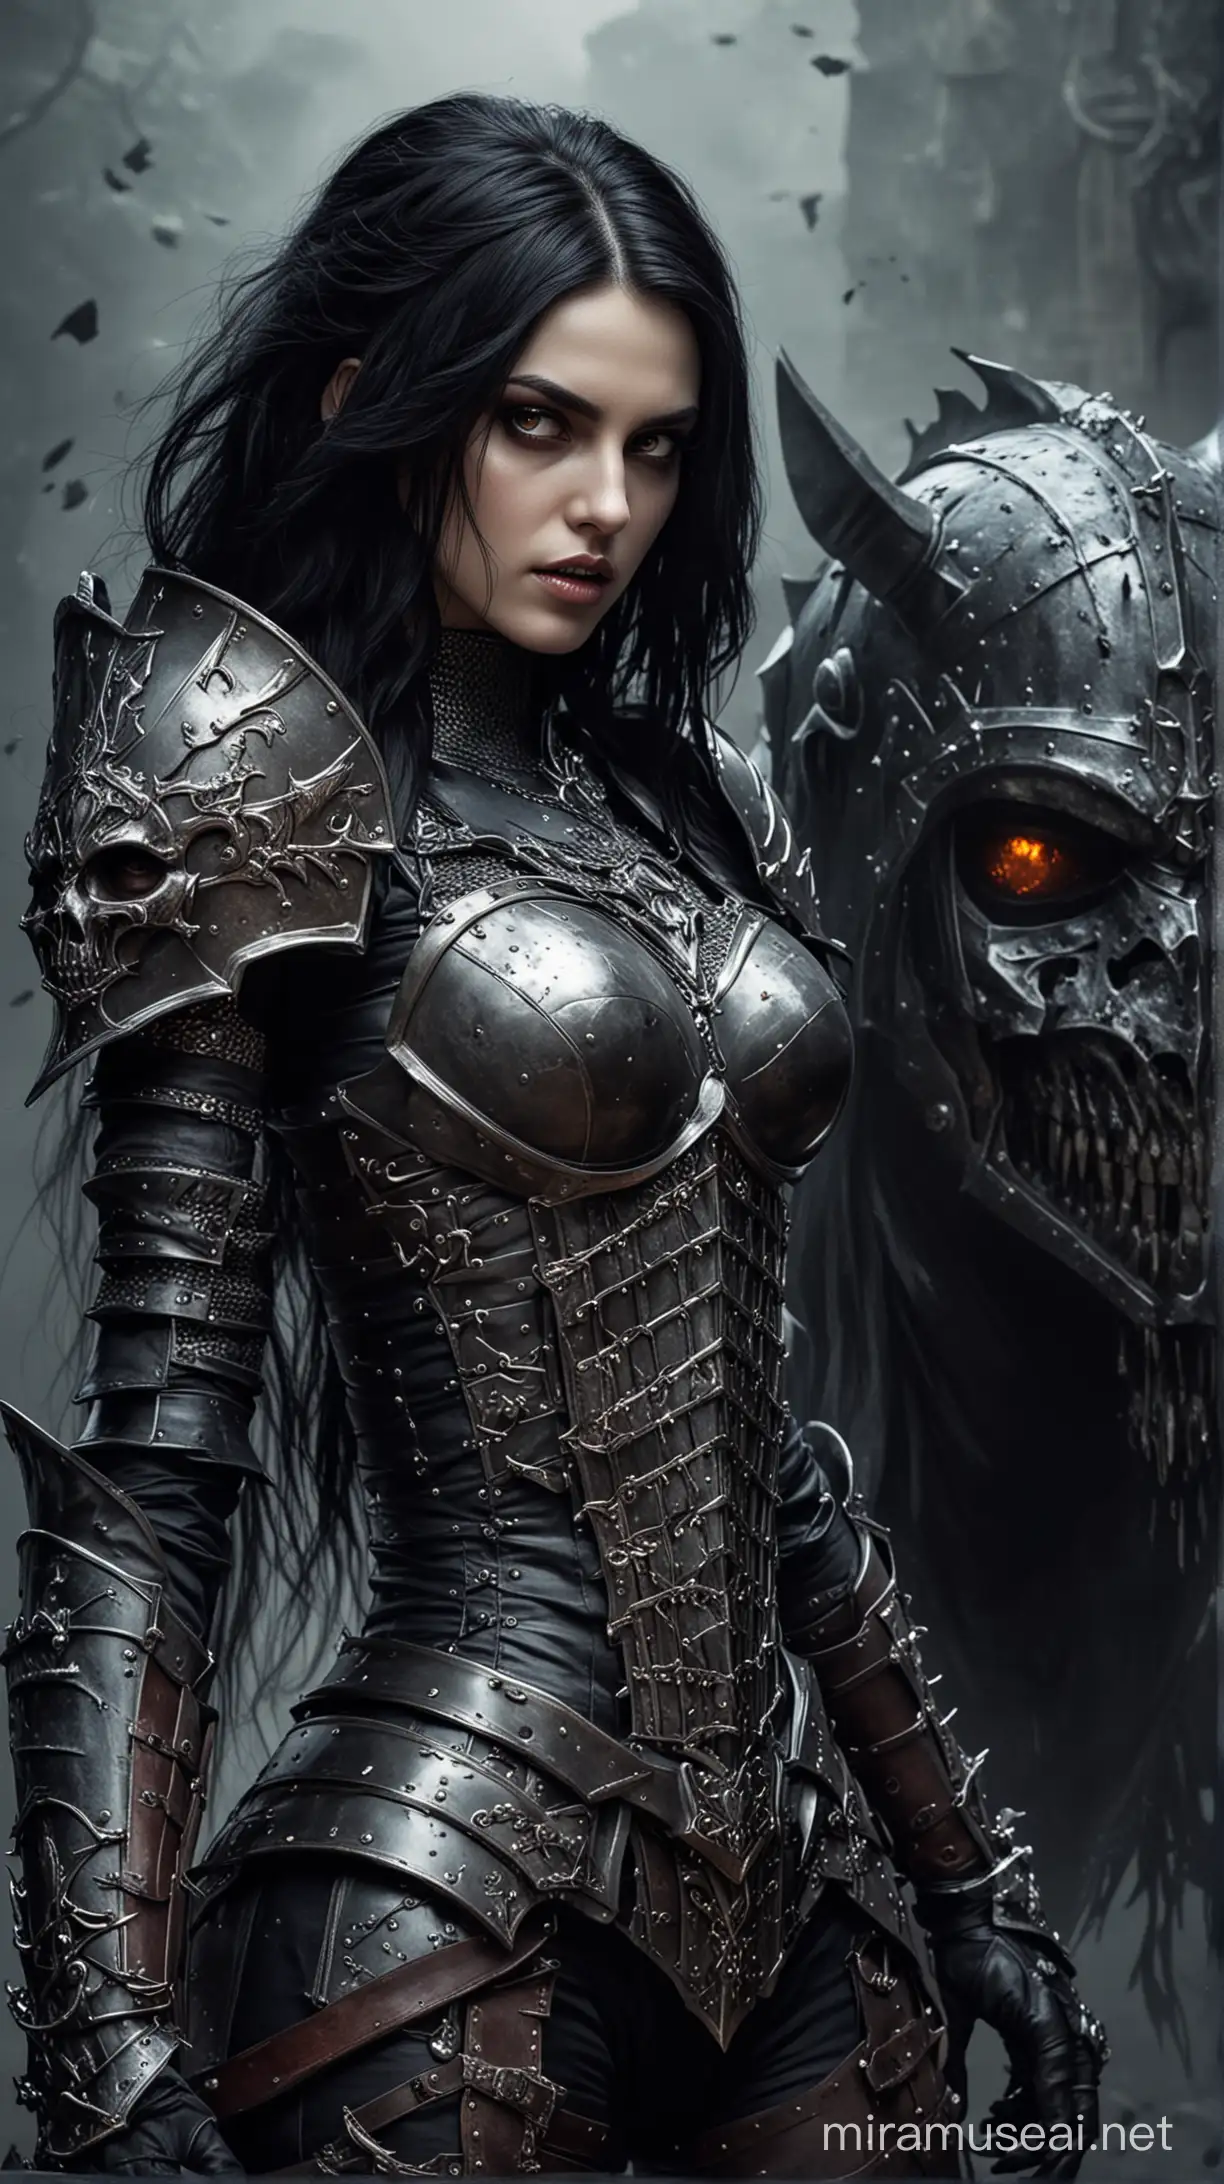 A vampire girl with black hair and a large undead knight in full armor and helmet